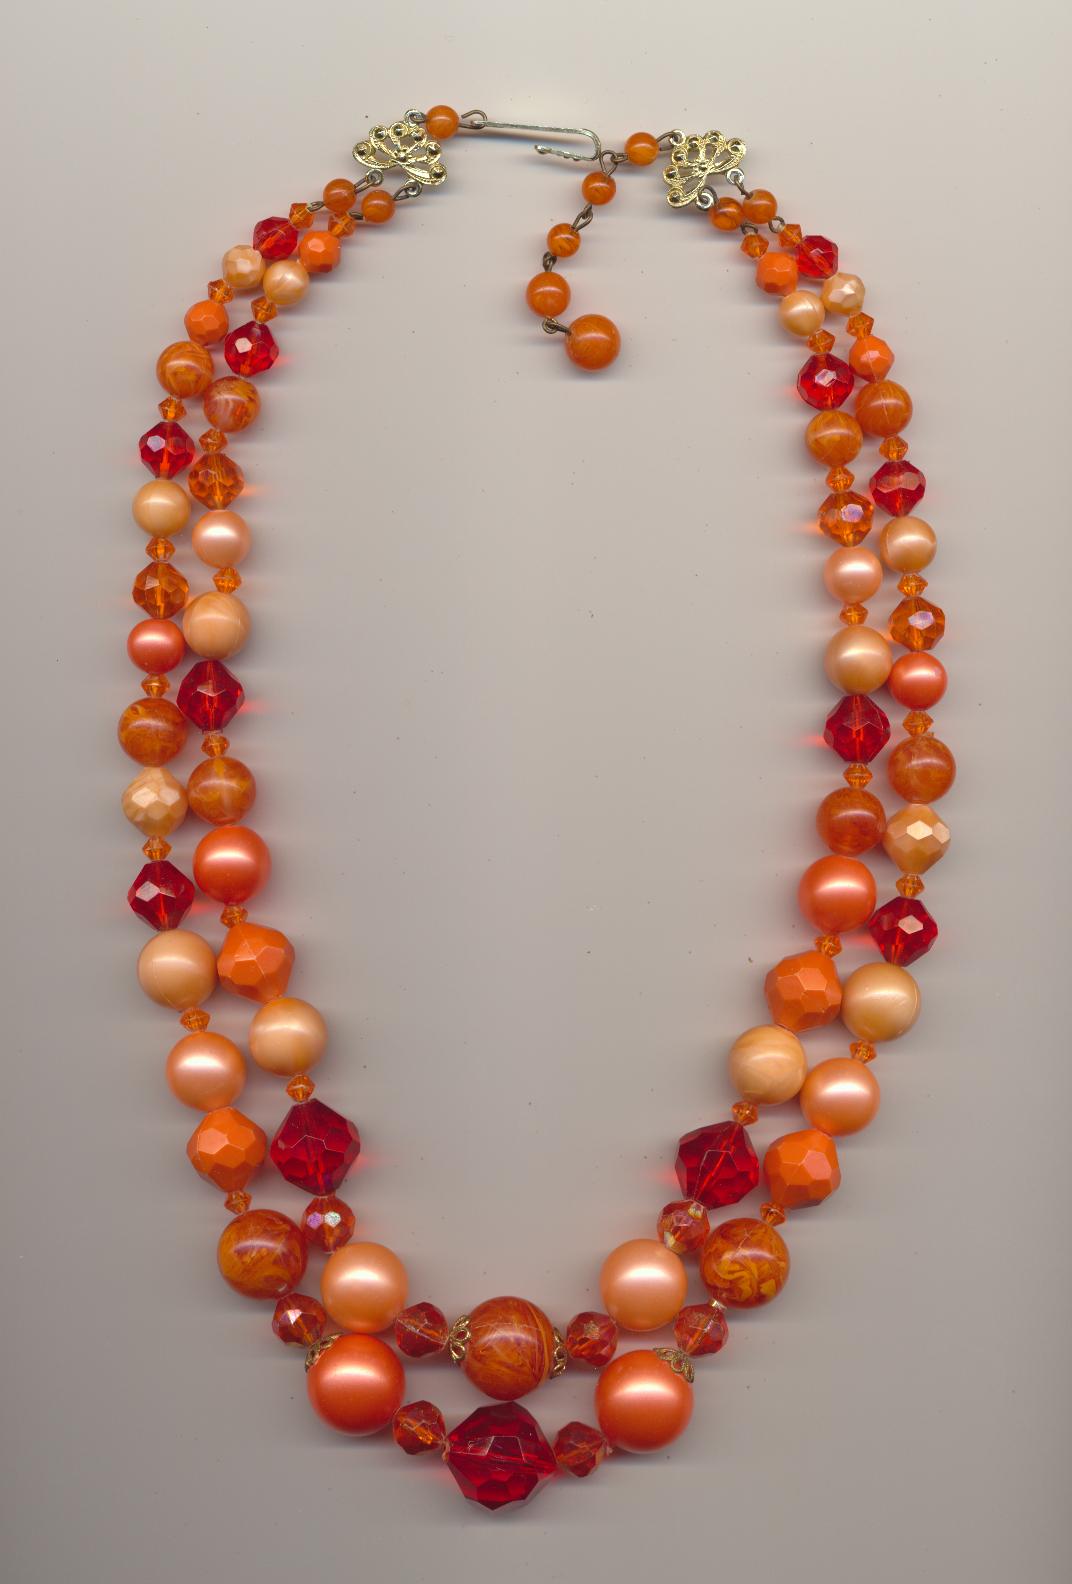 Showily vintage necklace made of plastic beads, Germany, 1960's, length inner row 18'' 46cm., outer row 20.5'' 52cm., extension chain 2'' 6cm.